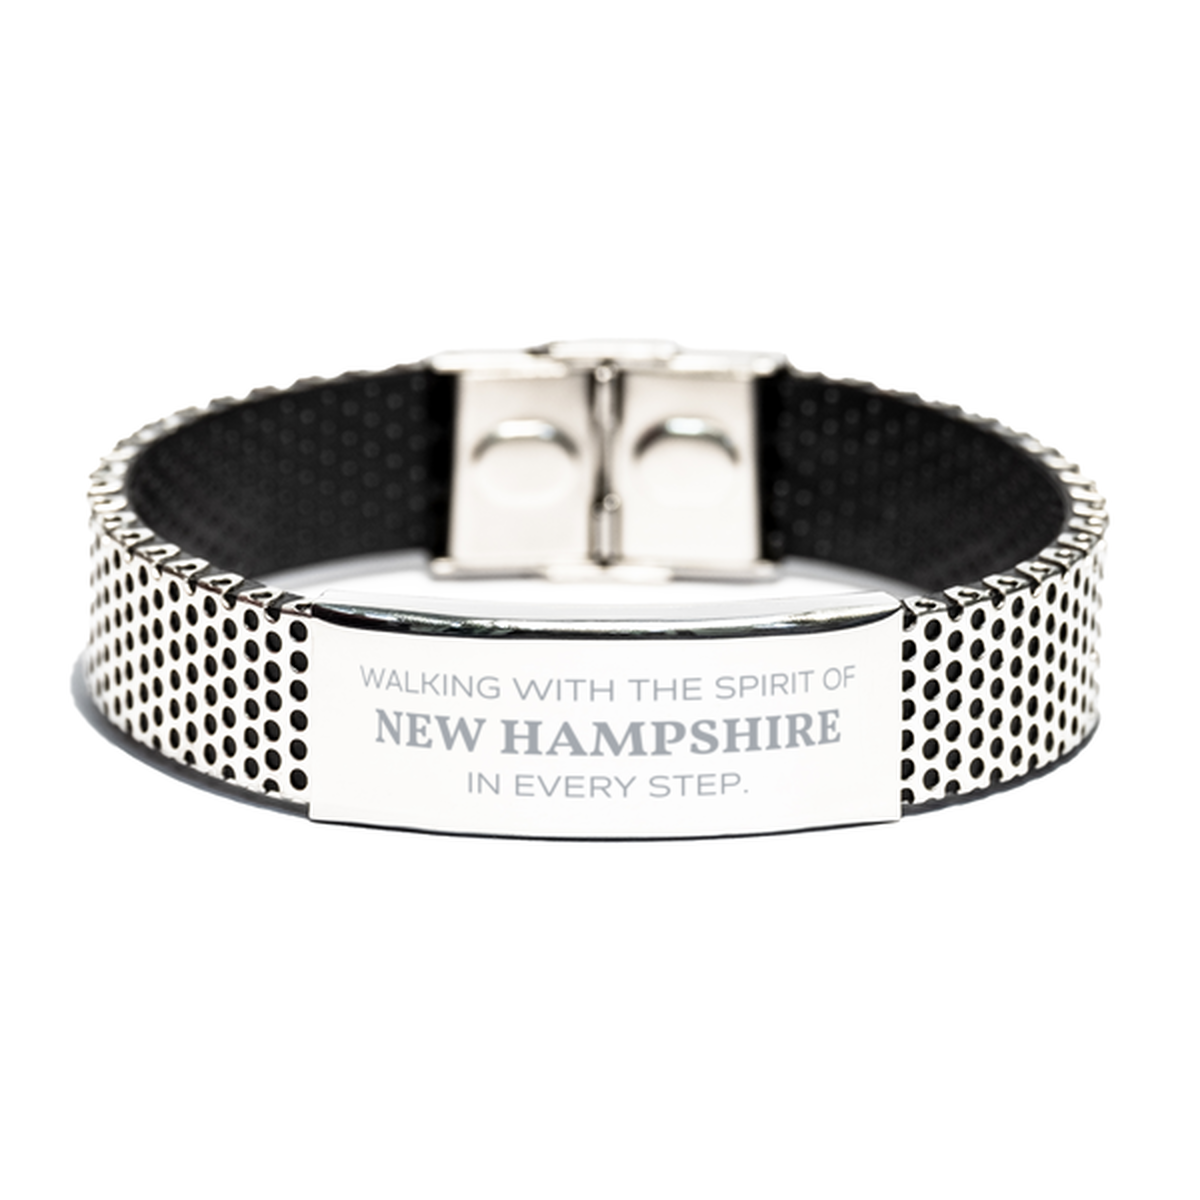 New Hampshire Gifts, Walking with the spirit, Love New Hampshire Birthday Christmas Stainless Steel Bracelet For New Hampshire People, Men, Women, Friends